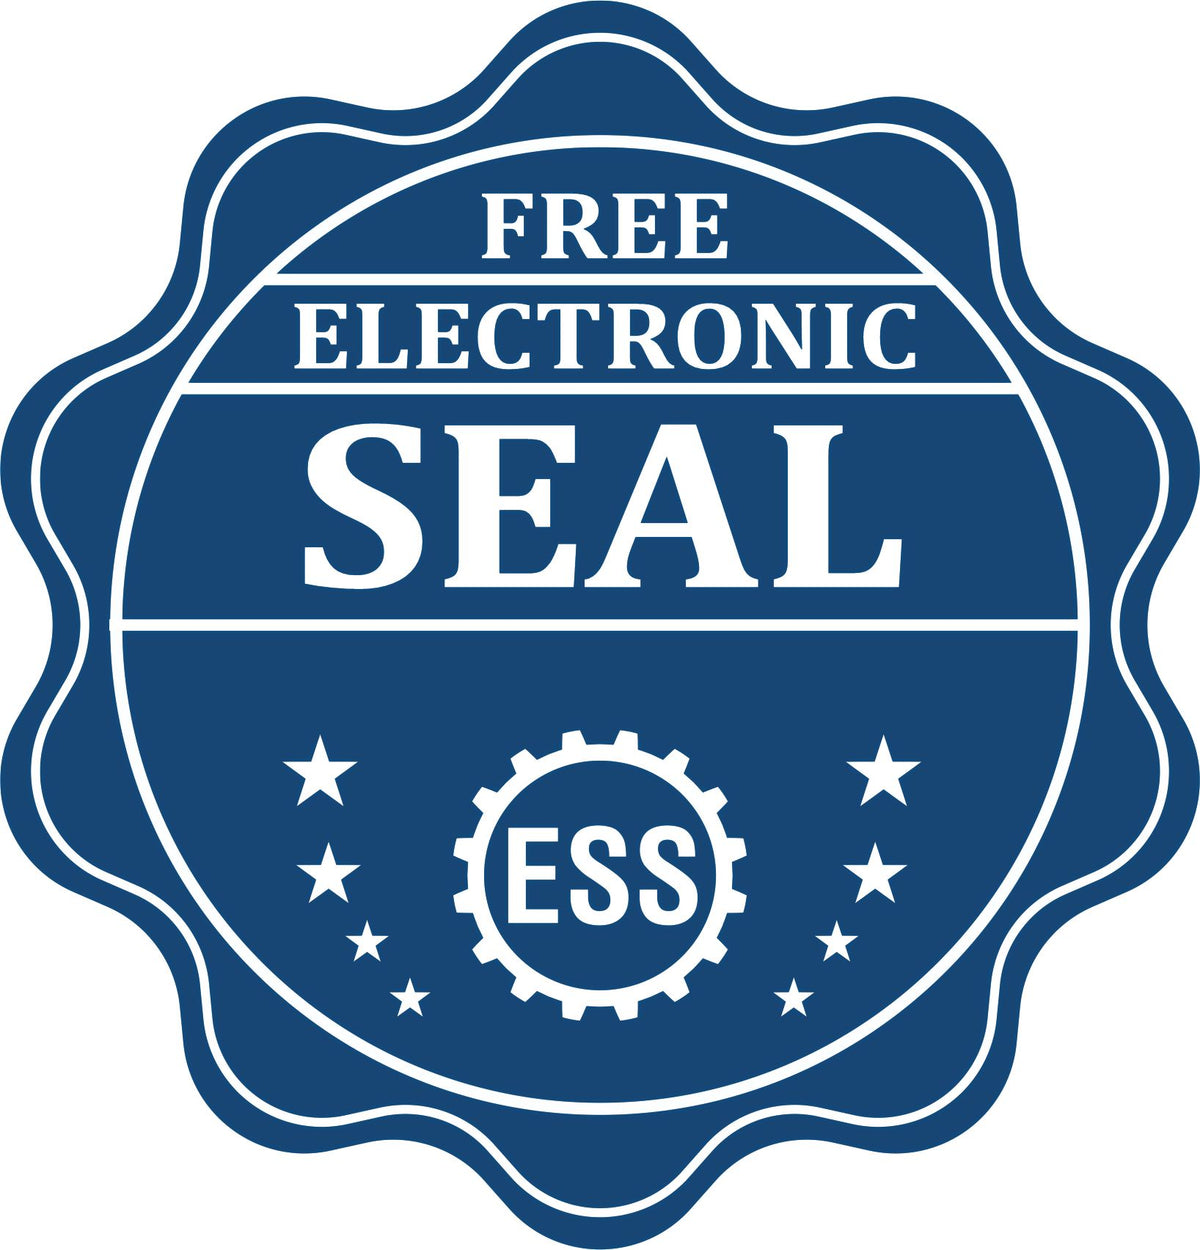 A badge showing a free electronic seal for the State of Louisiana Long Reach Architectural Embossing Seal with stars and the ESS gear on the emblem.